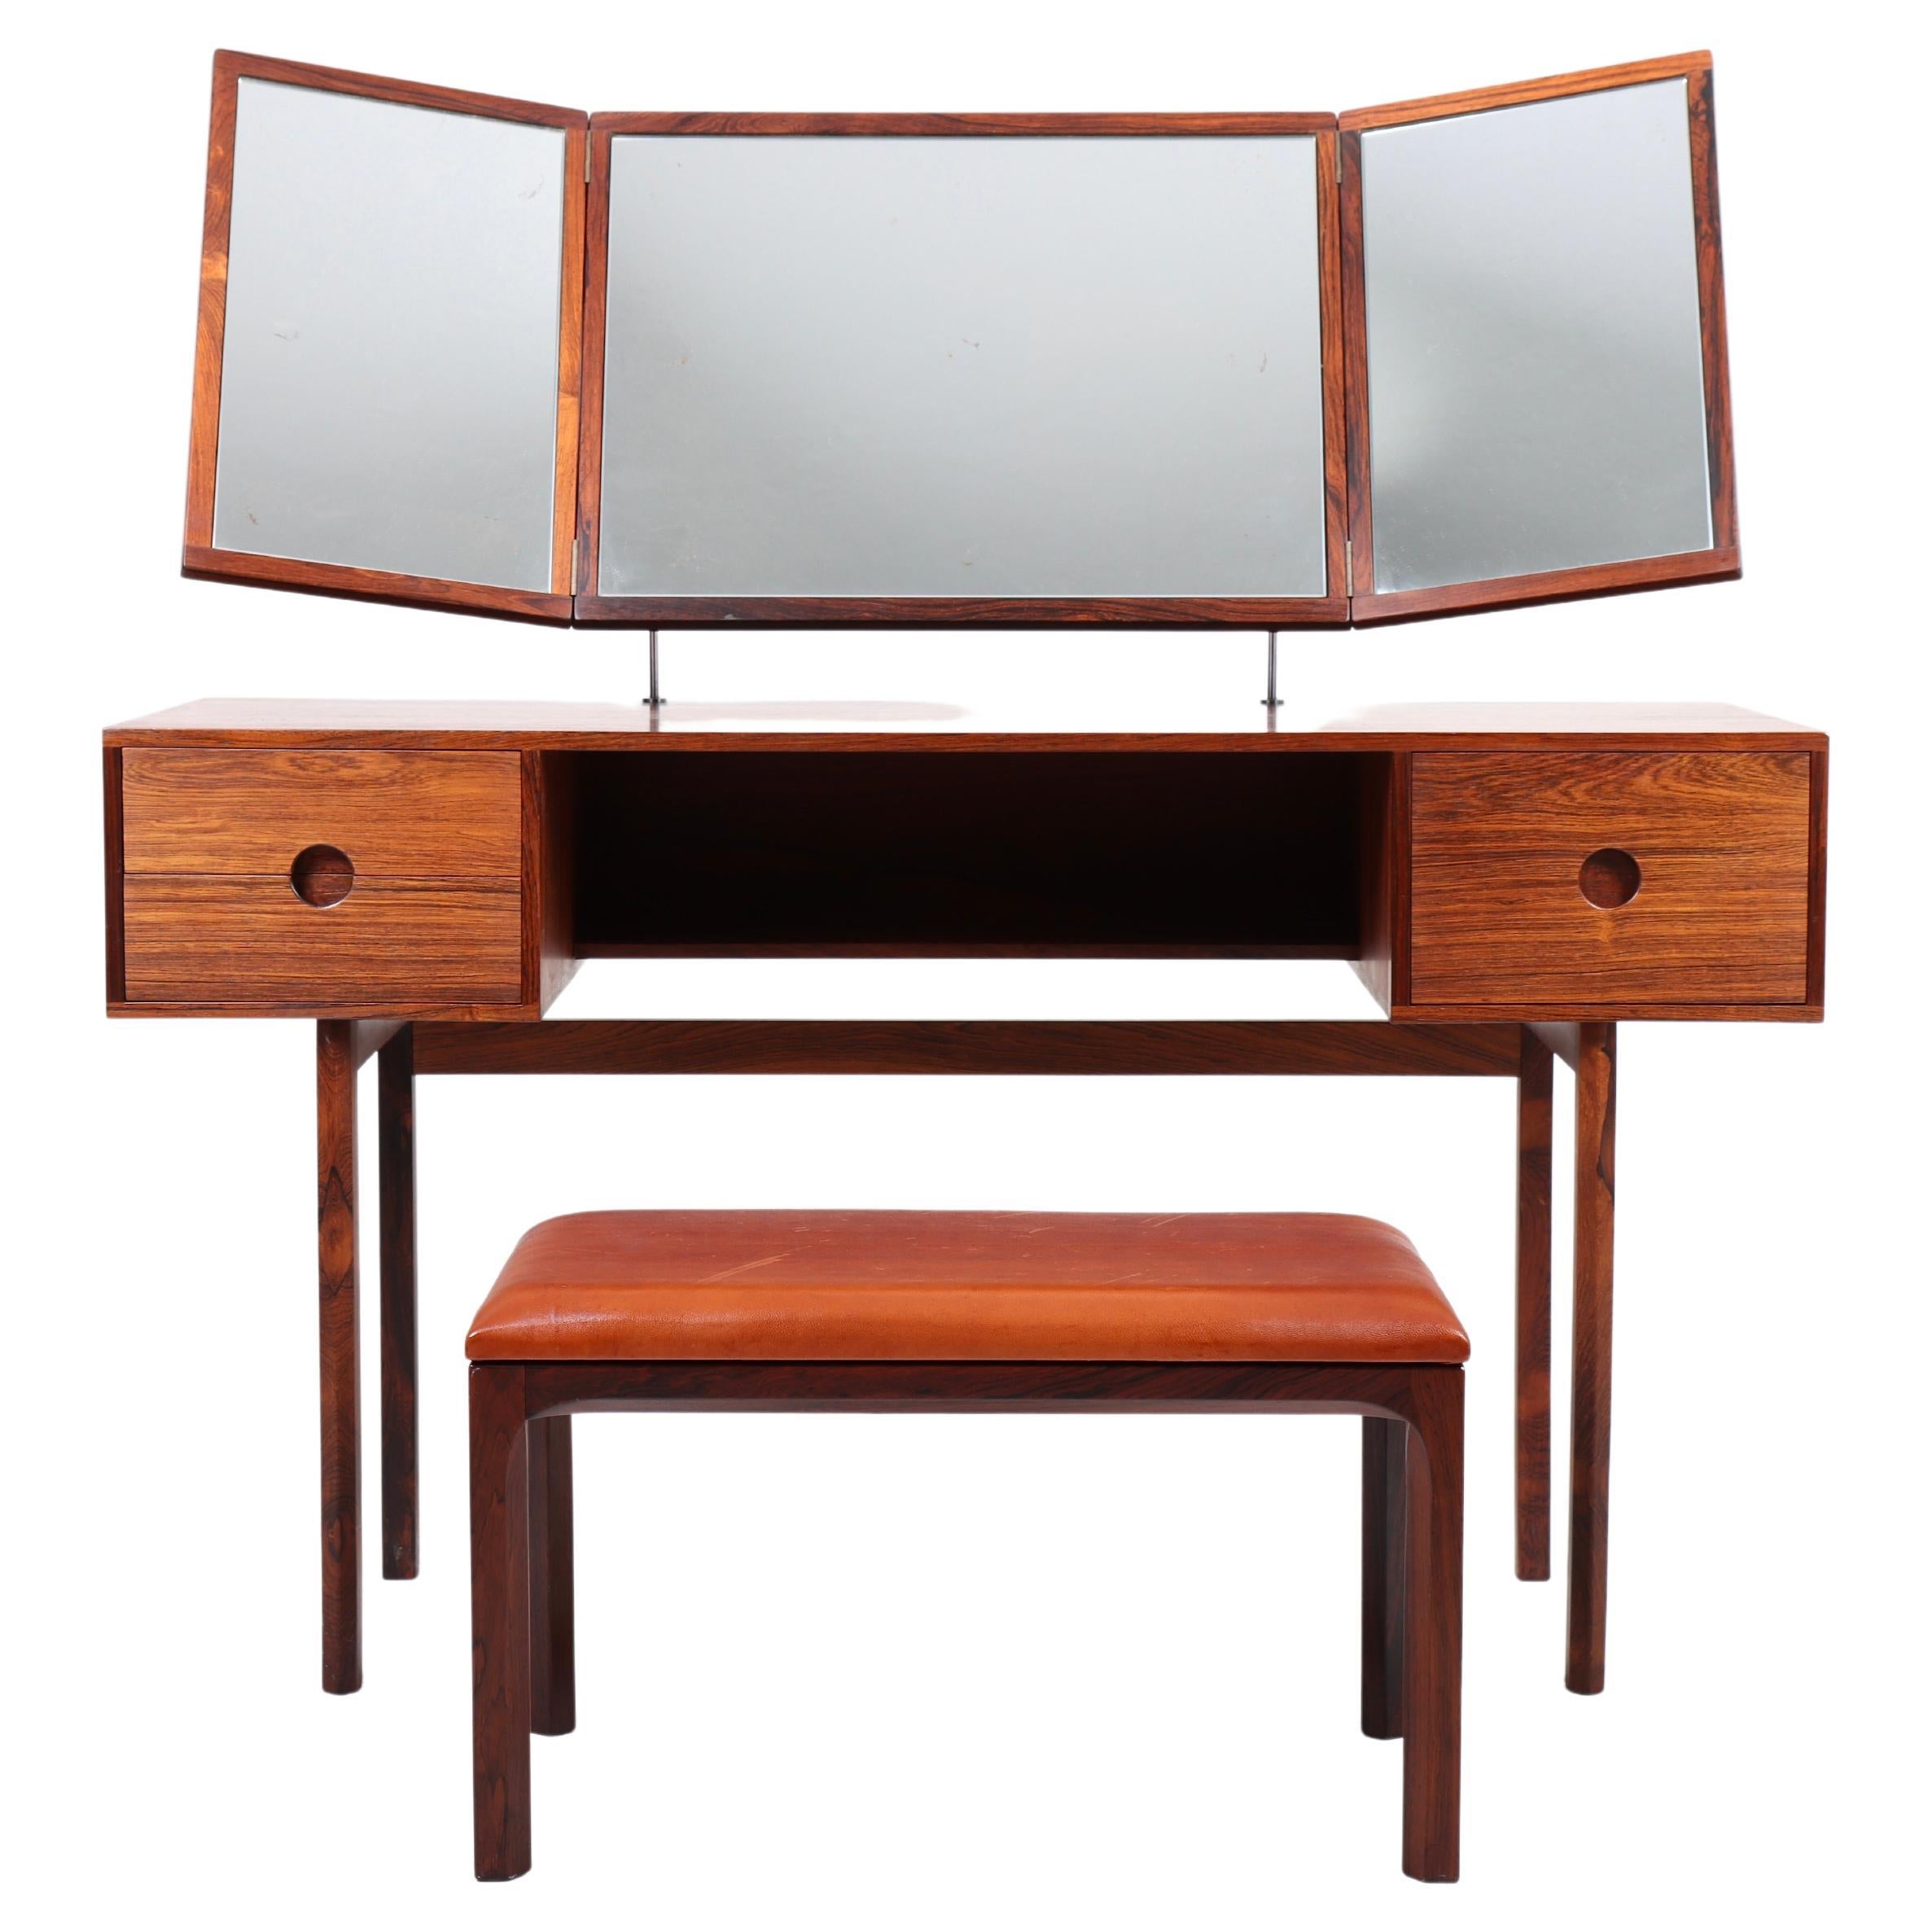 Dressing table in rosewood with matching stool in patinated leather. Designed by Kai Kristiansen and made by Aksel Kjærsgaard in the 1960s. Great condition.